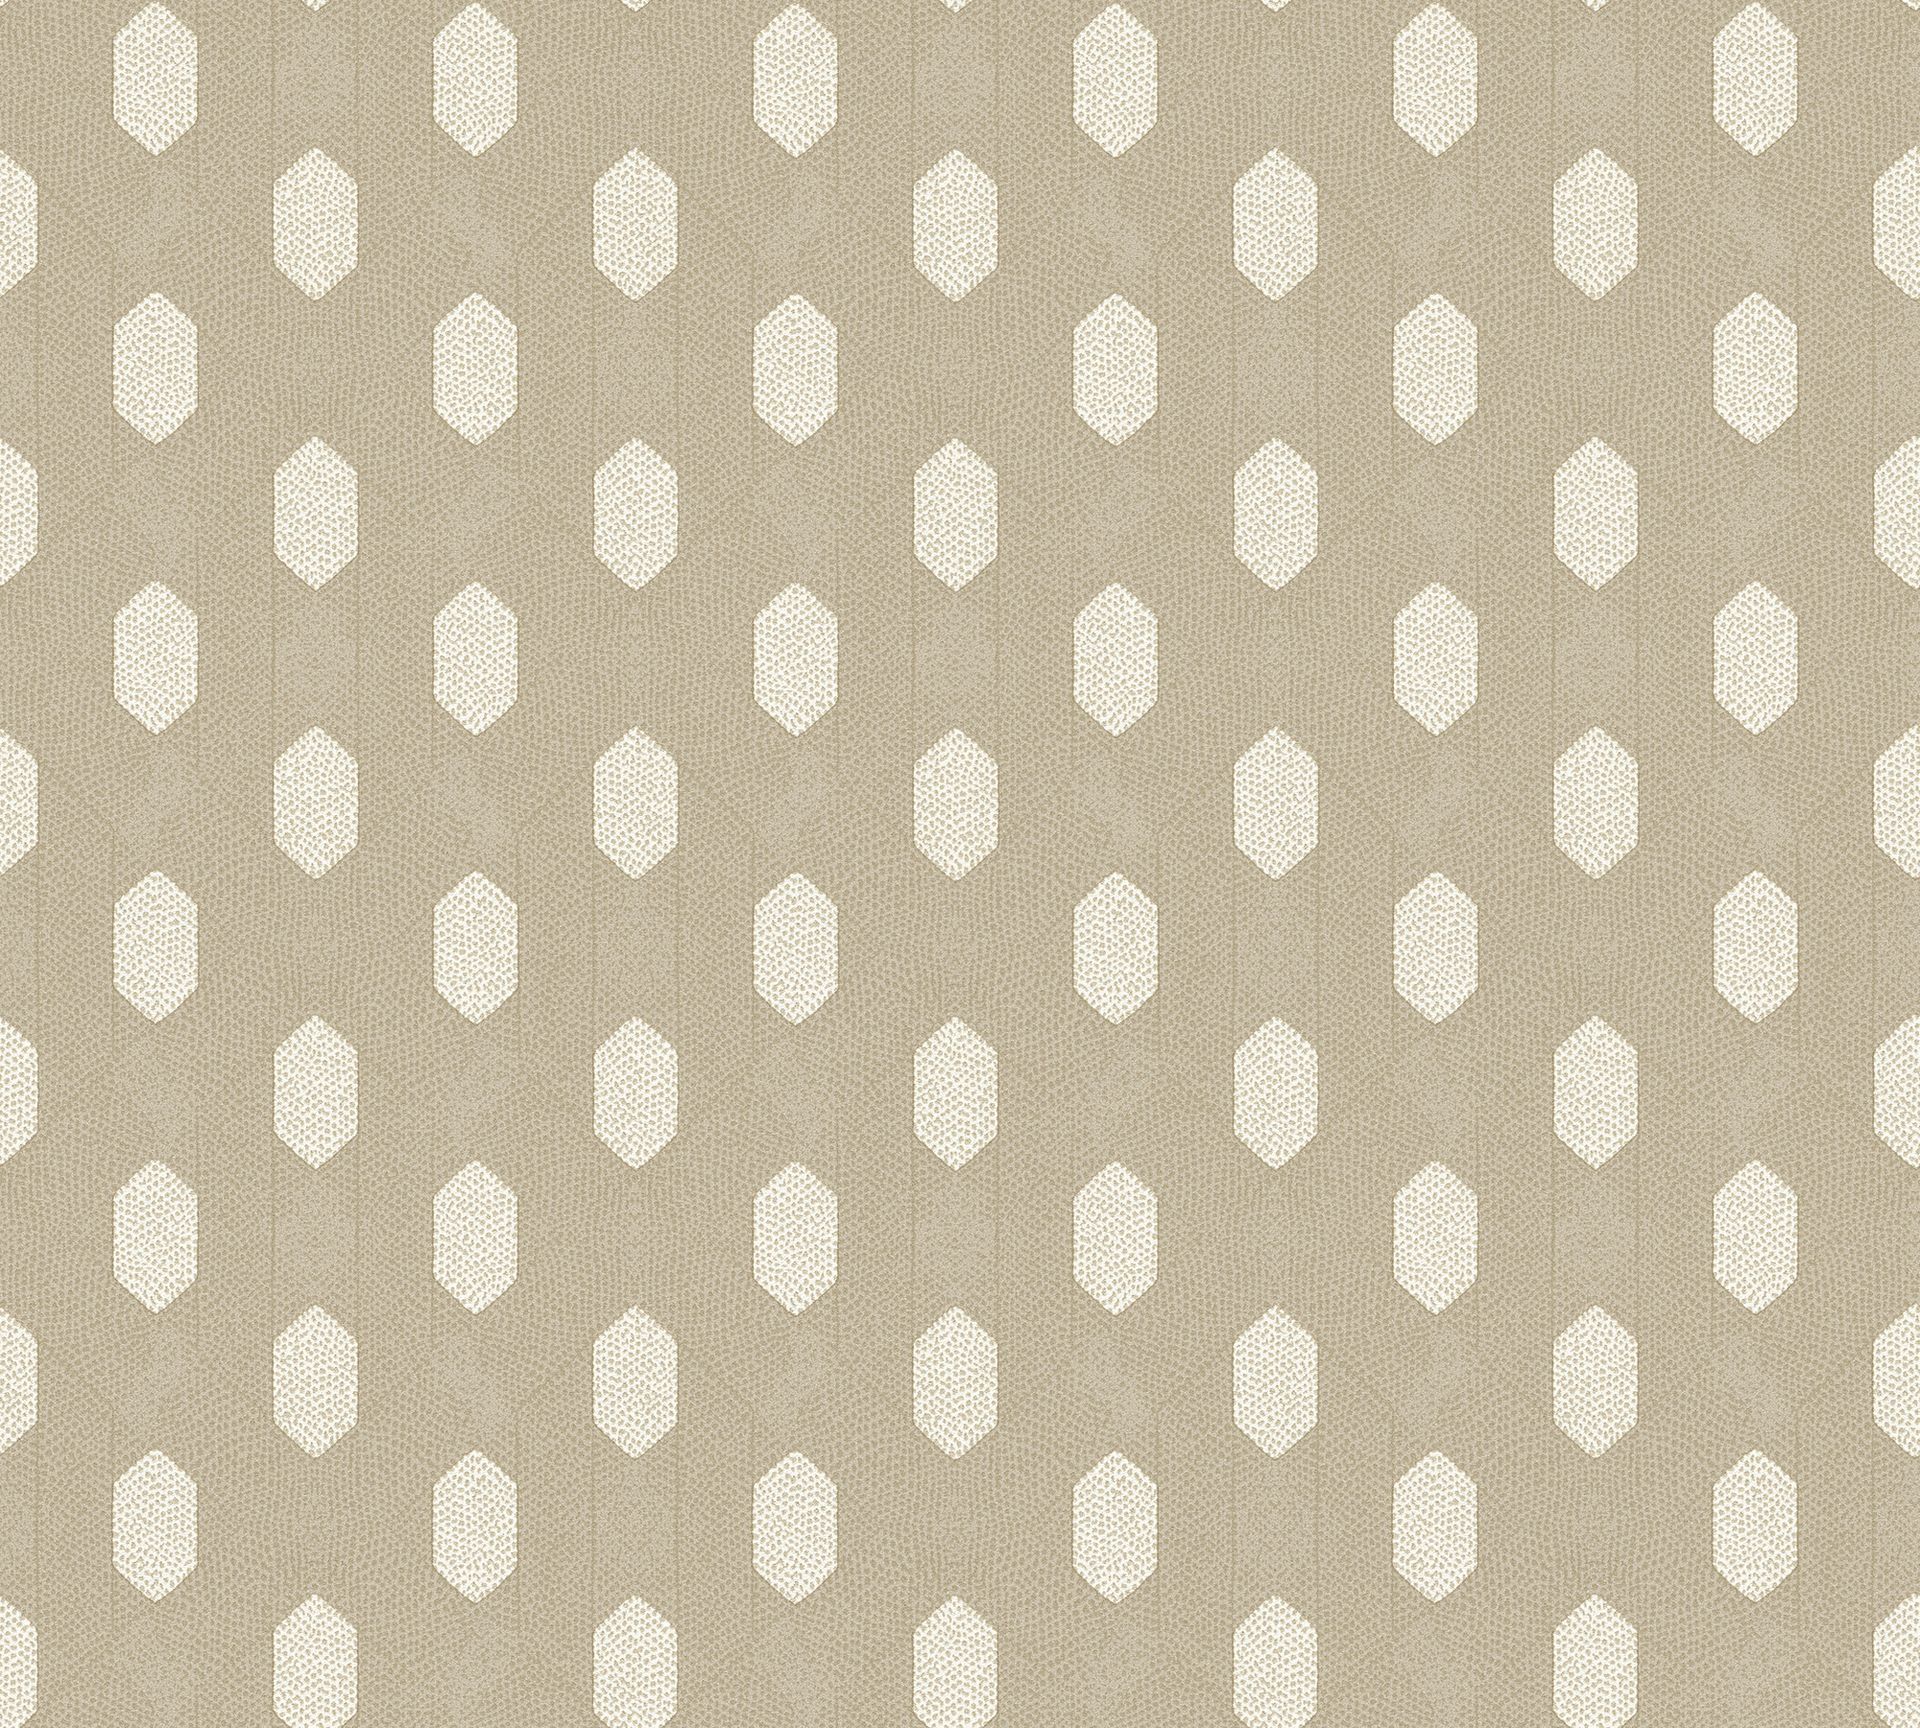 Architects Paper Absolutely Chic, Vintagetapete, creme, gold 369737